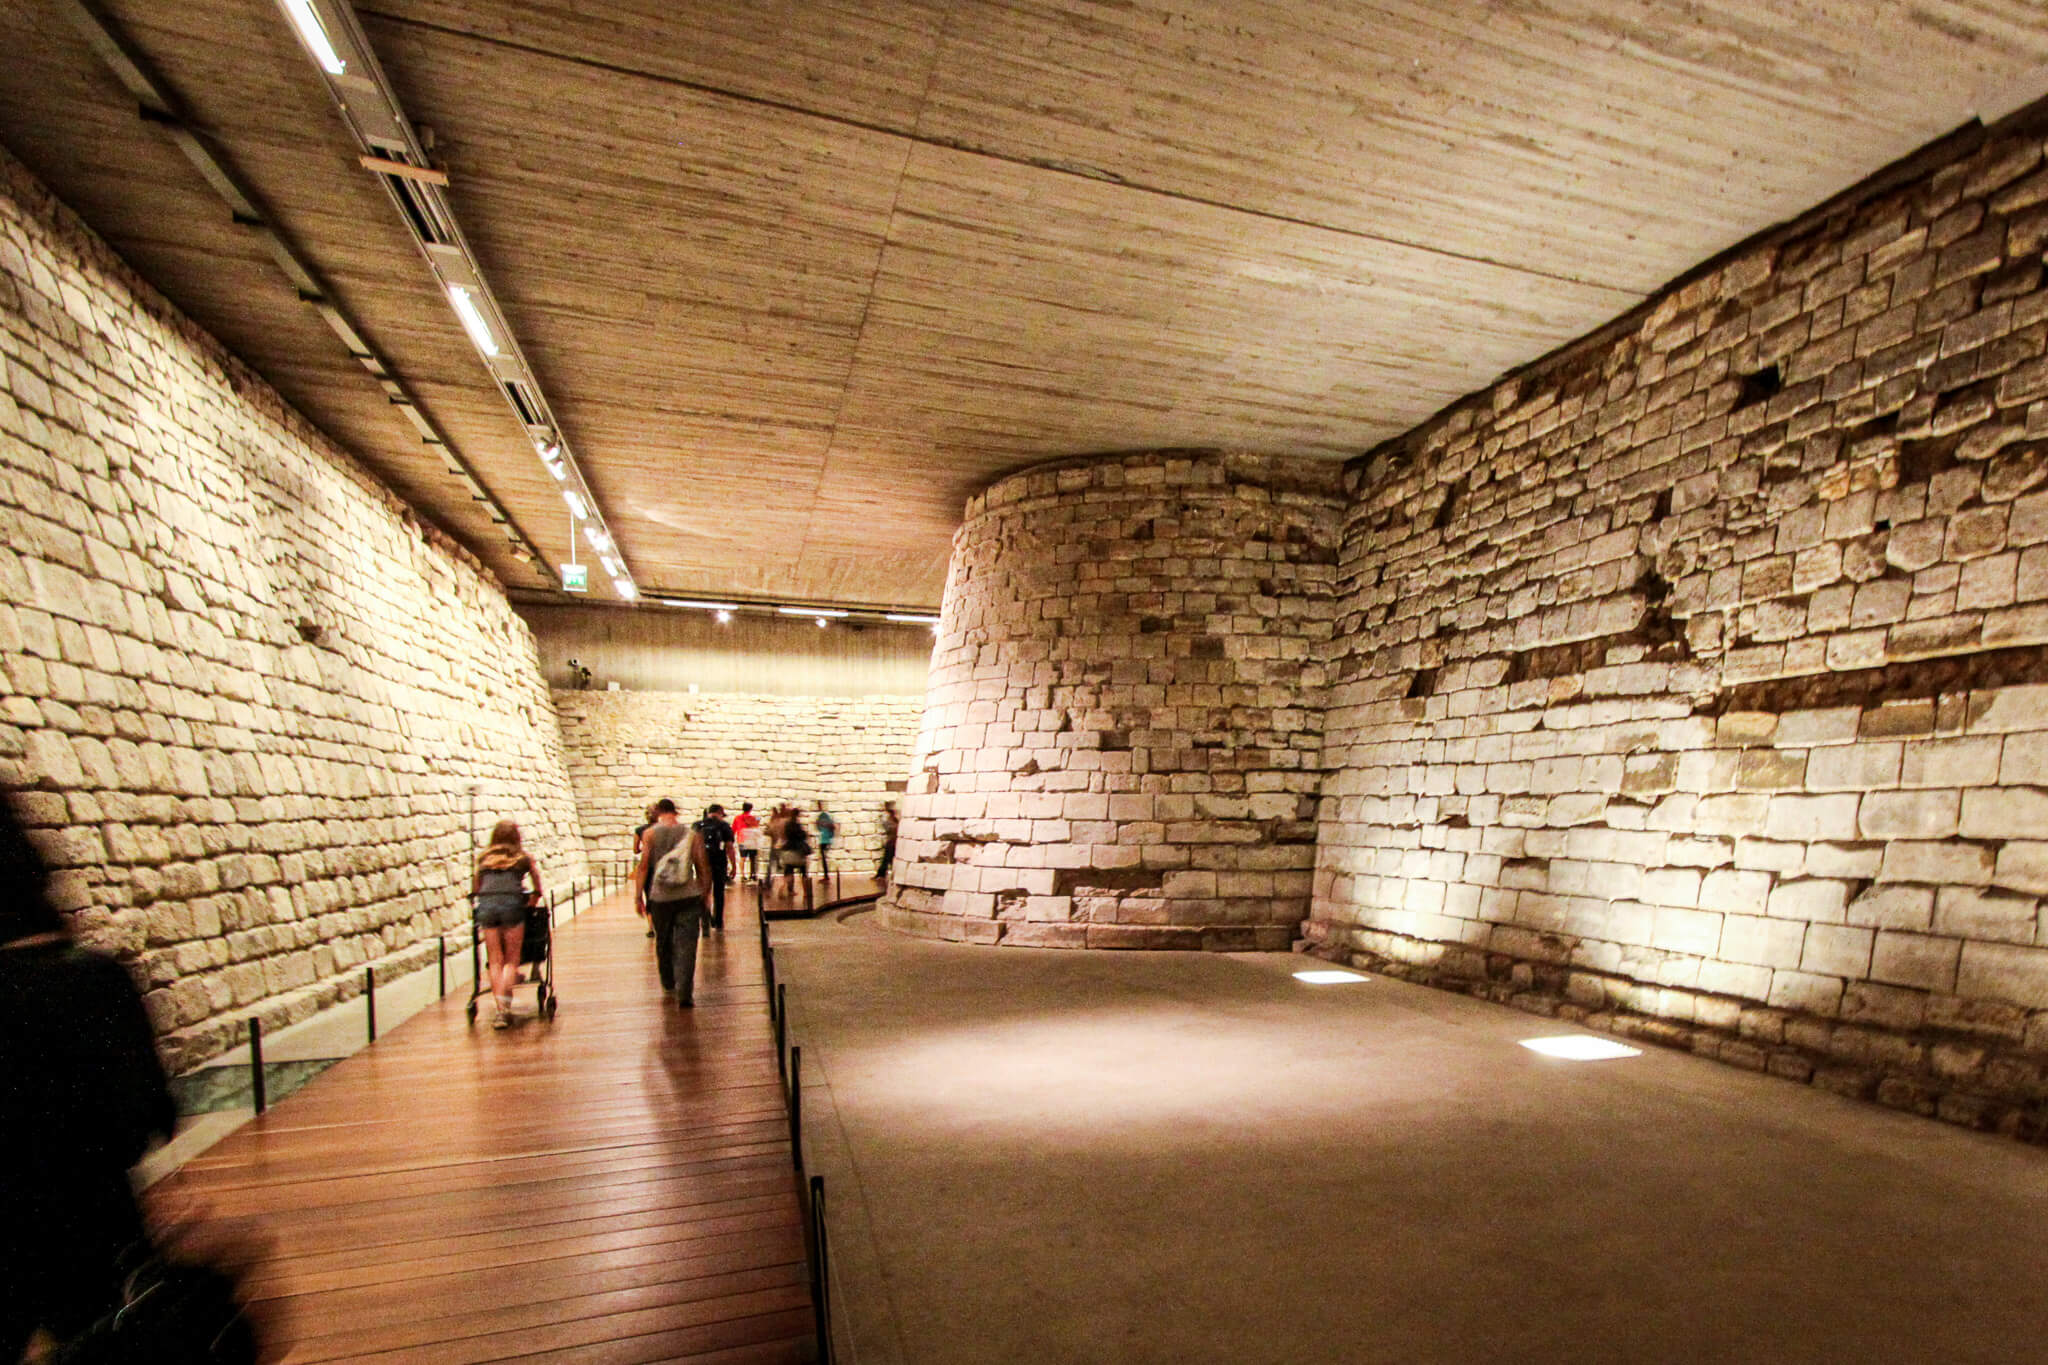 Foundations of the medieval Louvre castle beneath the Louvre Museum in Paris